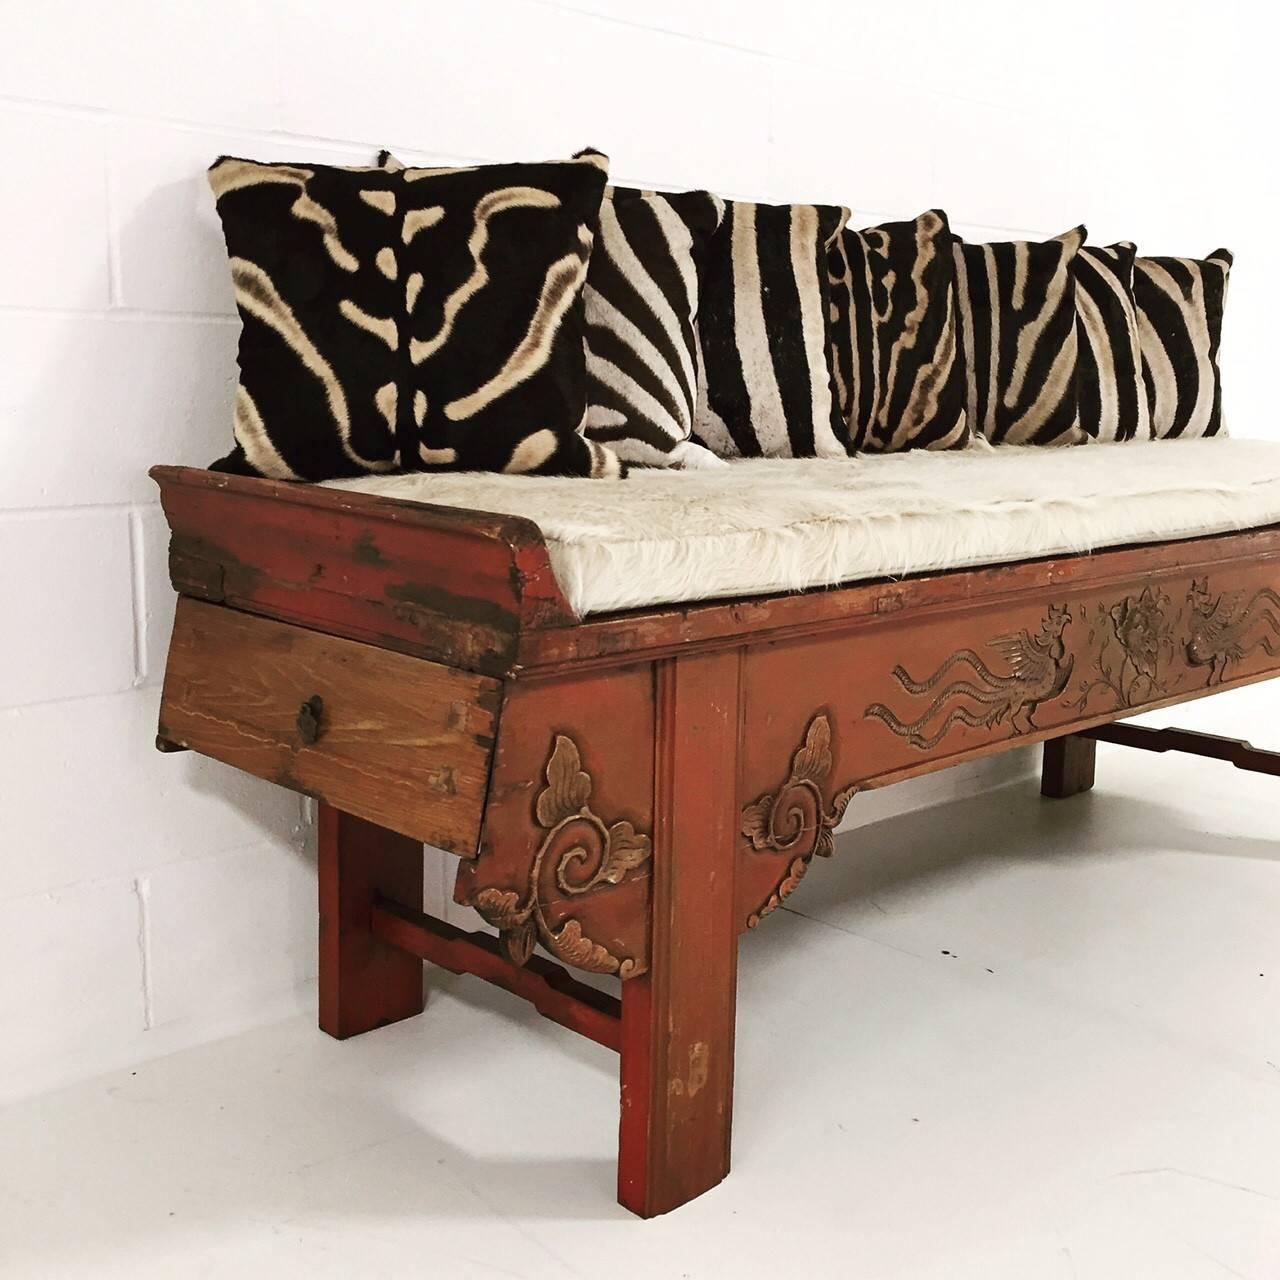 Chinese Carved Phoenix Bird Bench with Ivory Cowhide Cushion and Zebra Hide Pillows